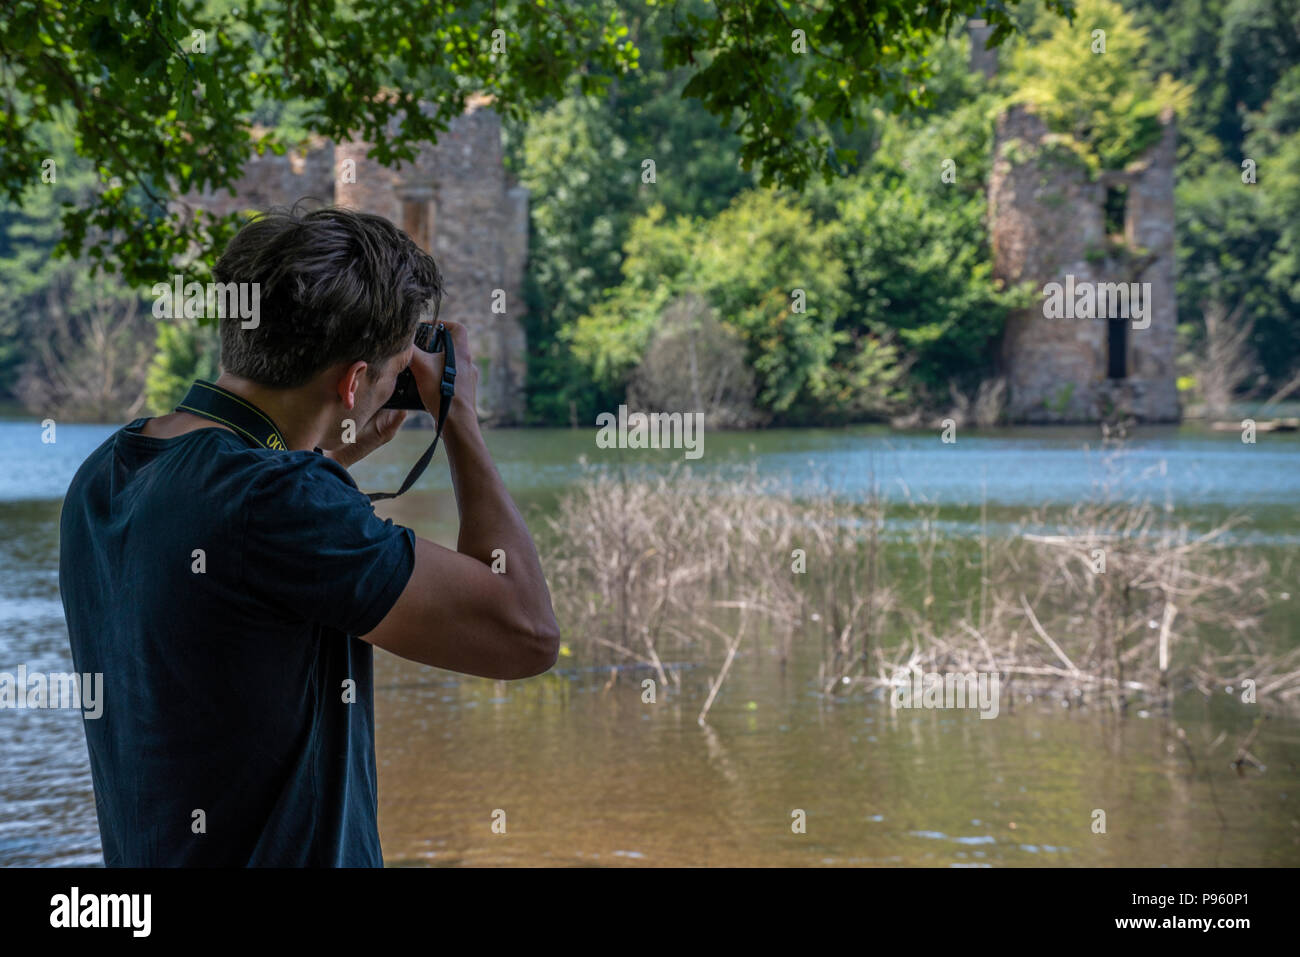 Man with a Nikon DSLR camera shooting the drowned 15th century ruins of Chateau Grandval, in Occitanie, France. Stock Photo